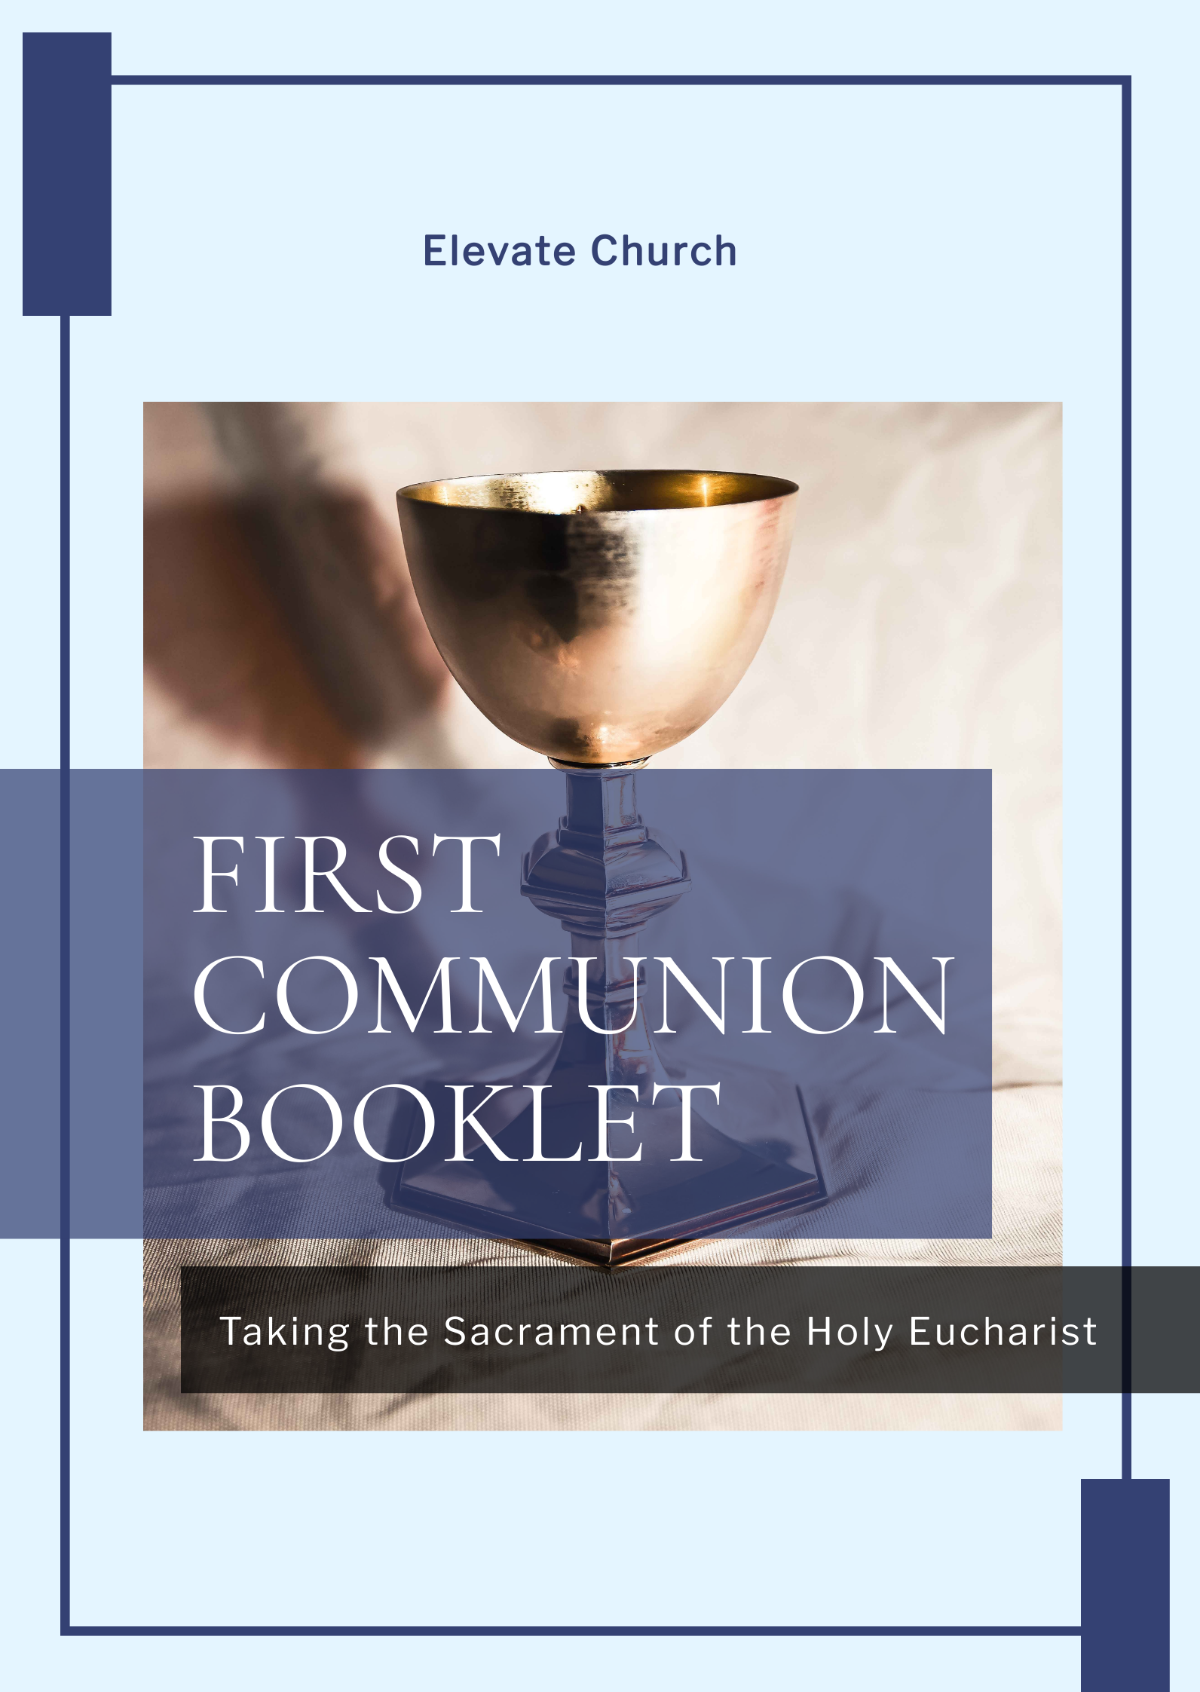 First Communion Booklet